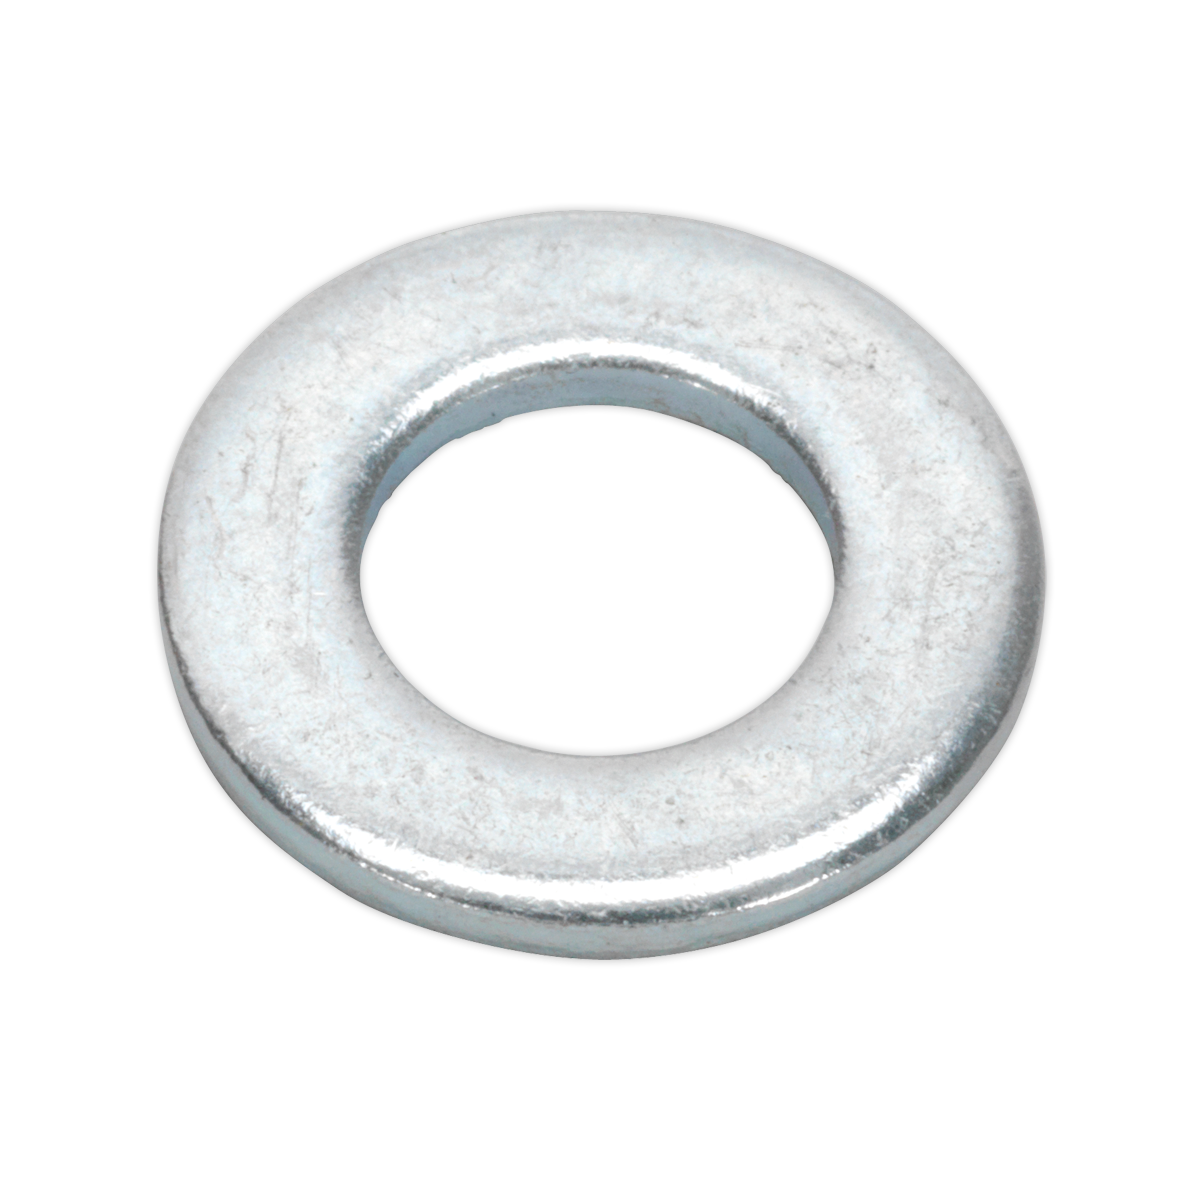 Sealey Flat Washer DIN 125 - M8 x 17mm Form A Zinc Pack of 100